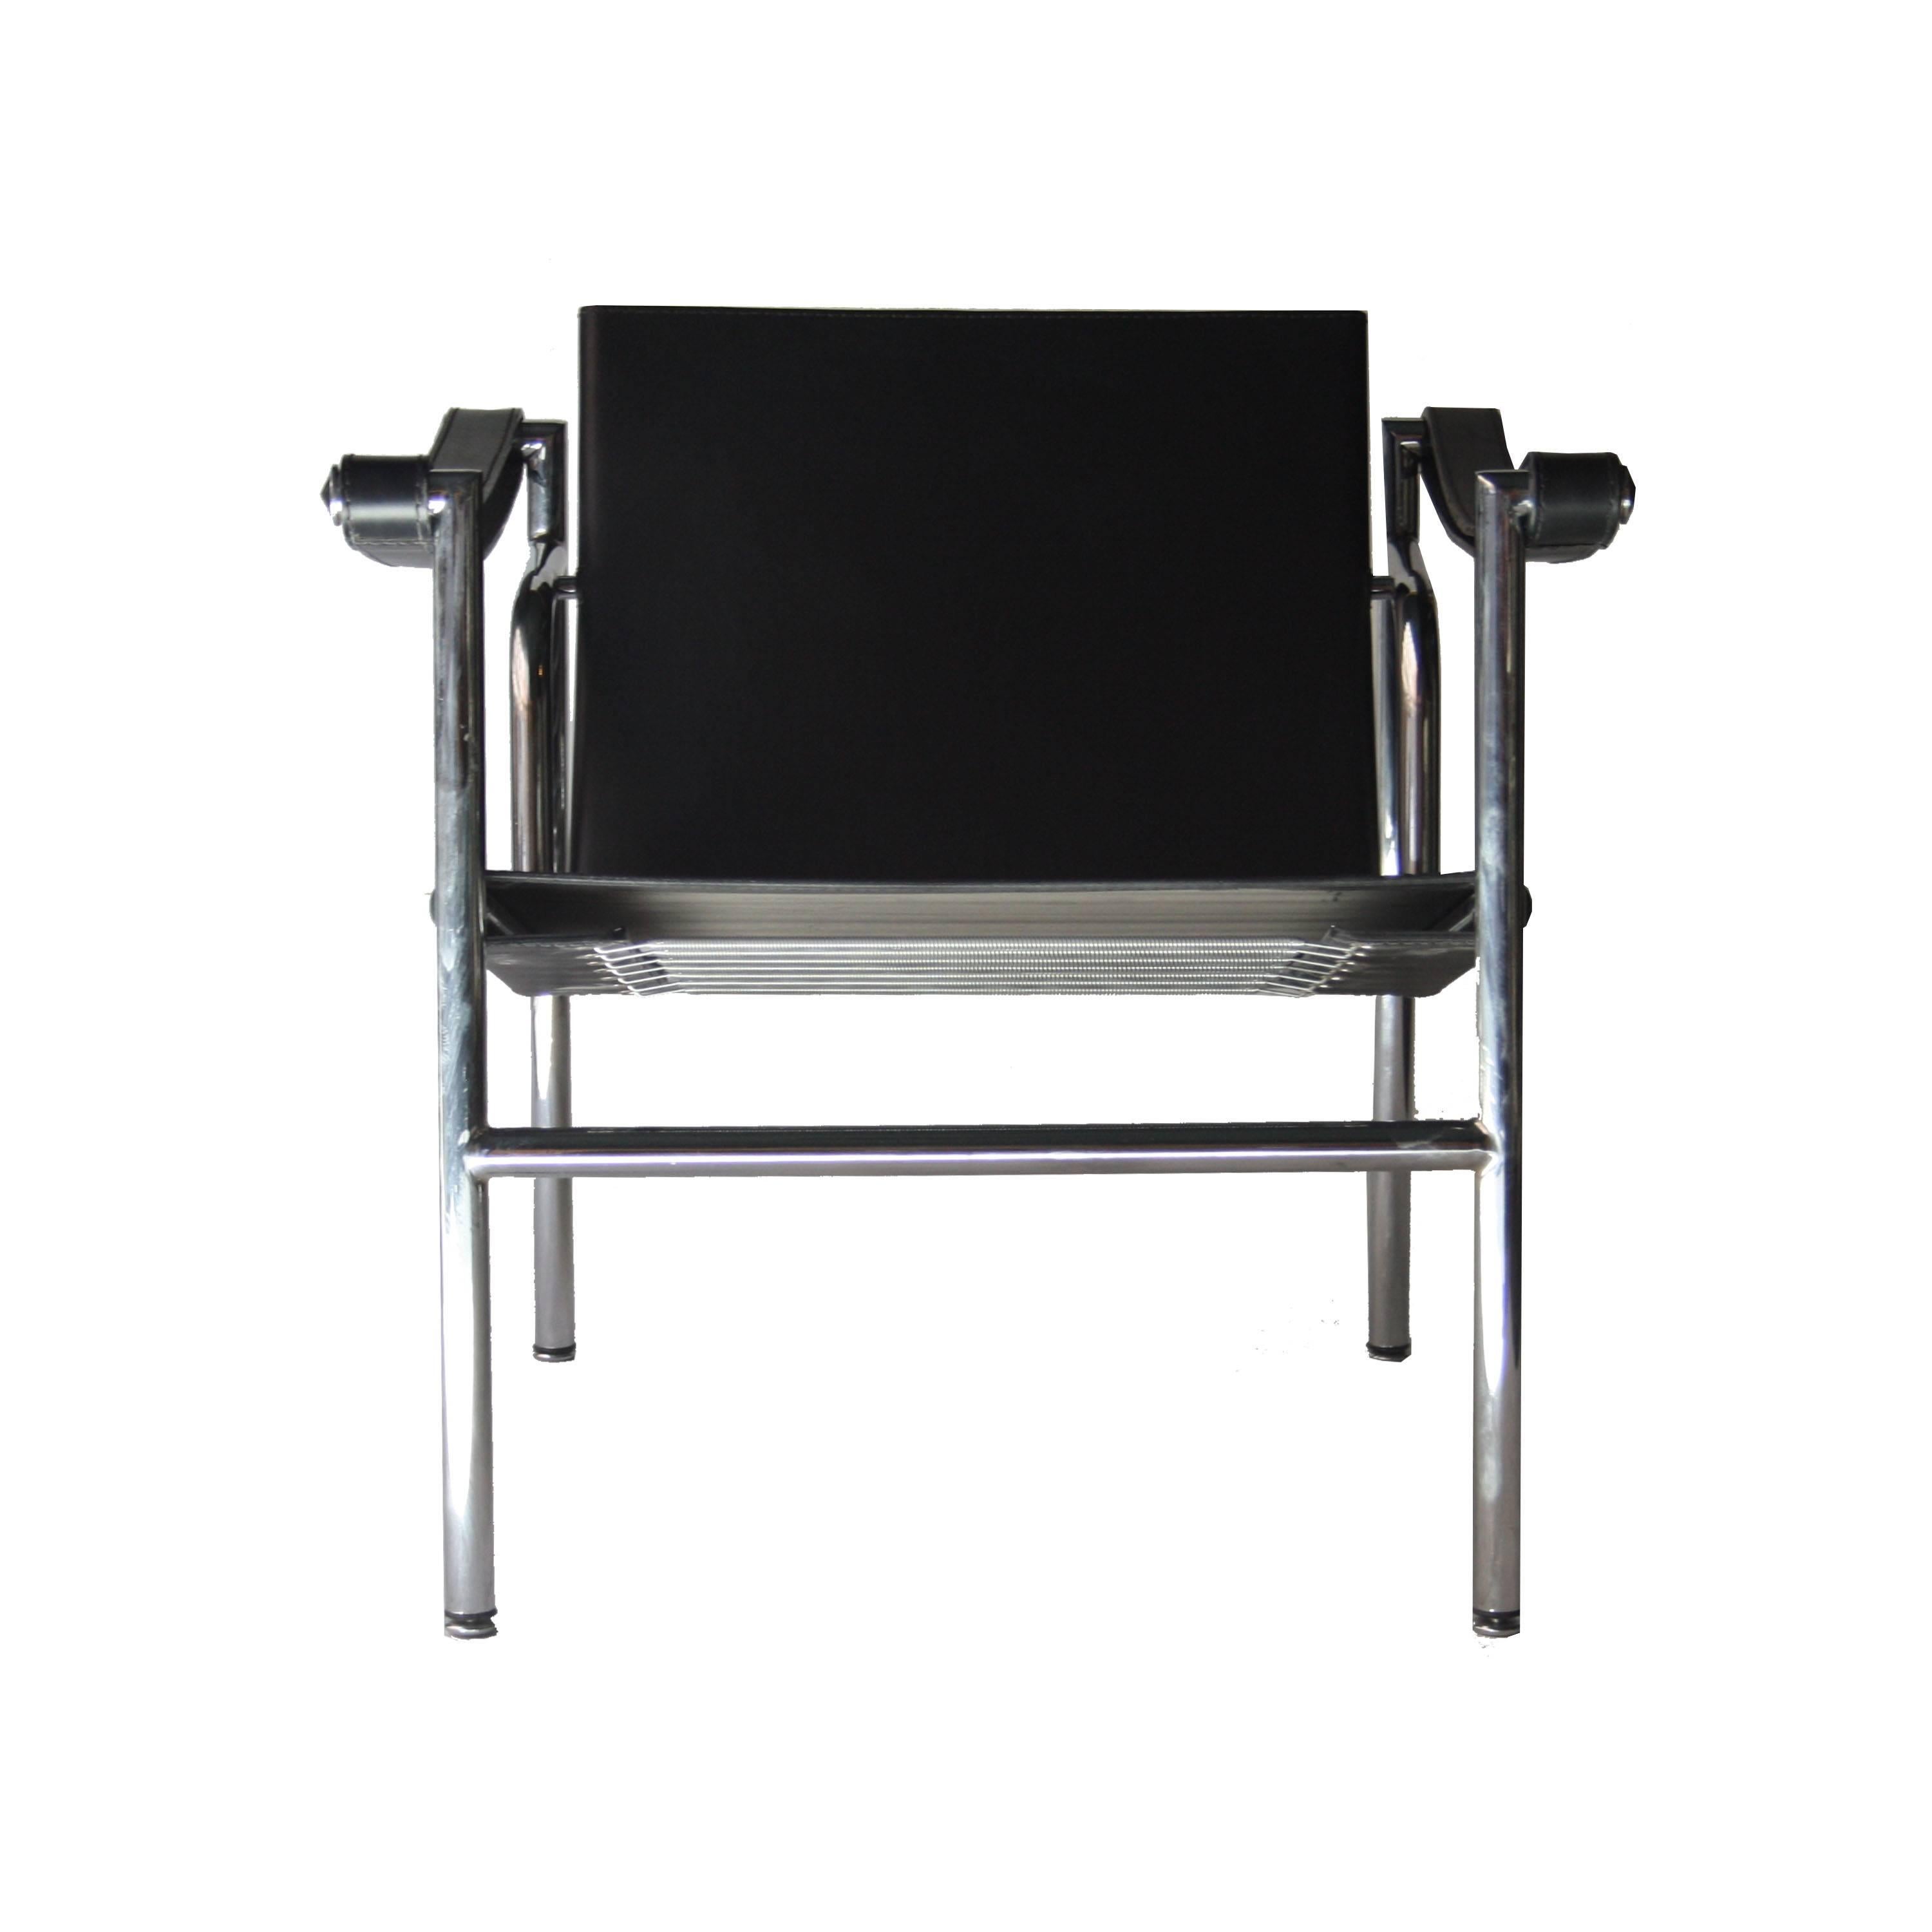 Armchair with chrome tubular steel structure in style of Le Corbusier, arms and seat with original black leather.